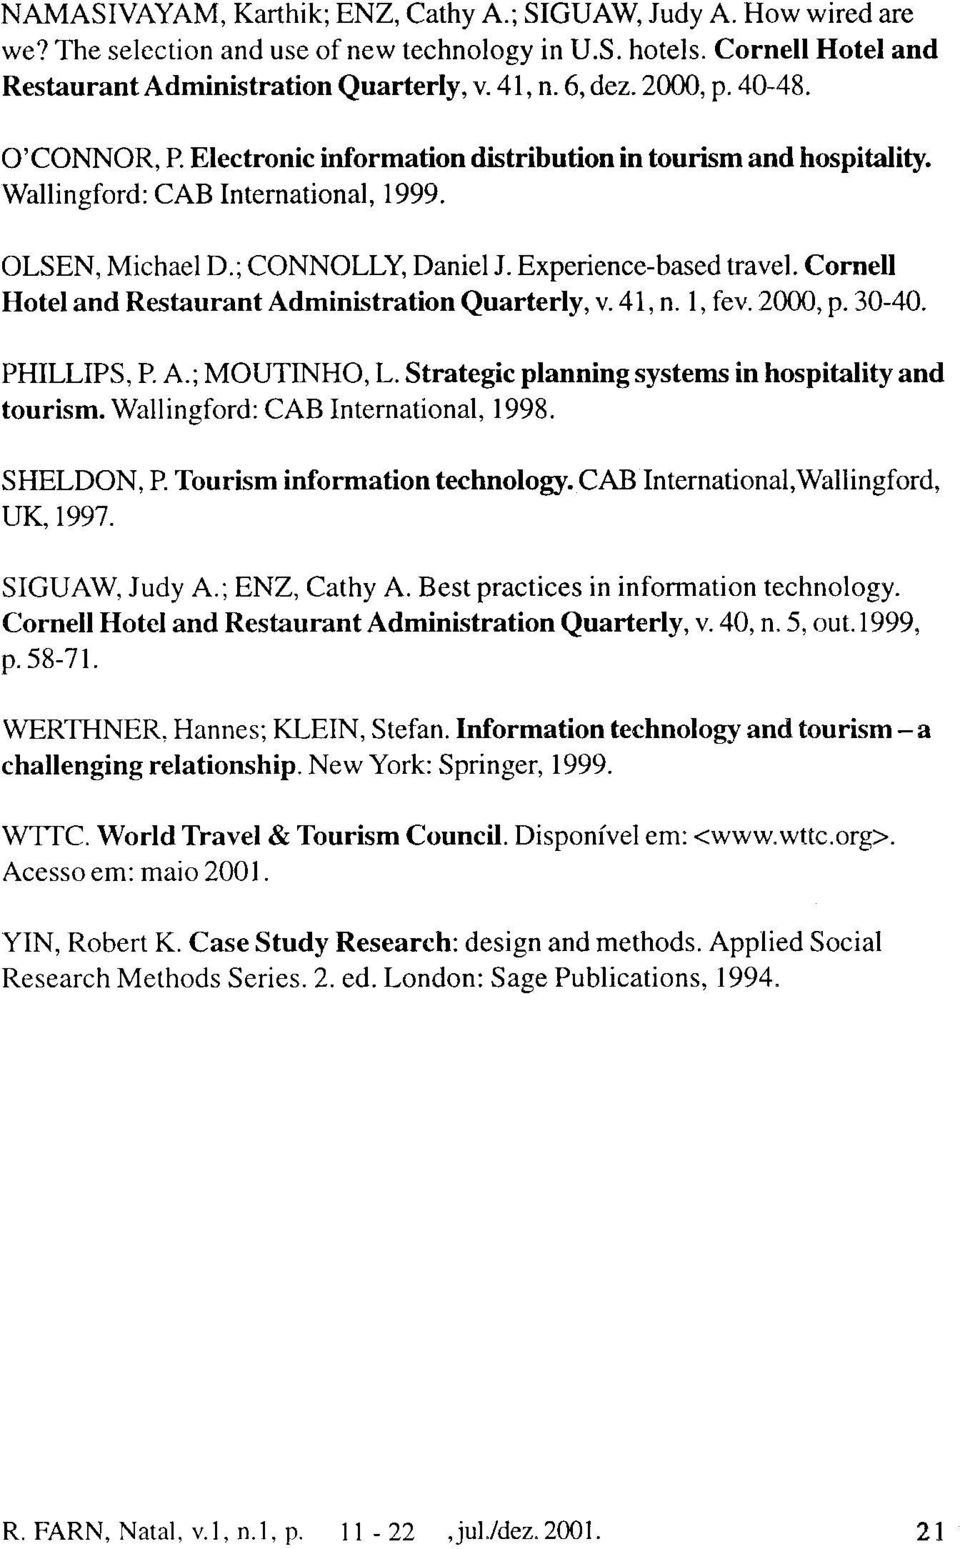 Cornell Hotel and Restaurant Administration Quarterly, v. 41, n. 1, fev. 2000, p. 30-40. PHILLIPS, P. A.; MOUTINHO, L. Strategic planning systems in hospitality and tourism.